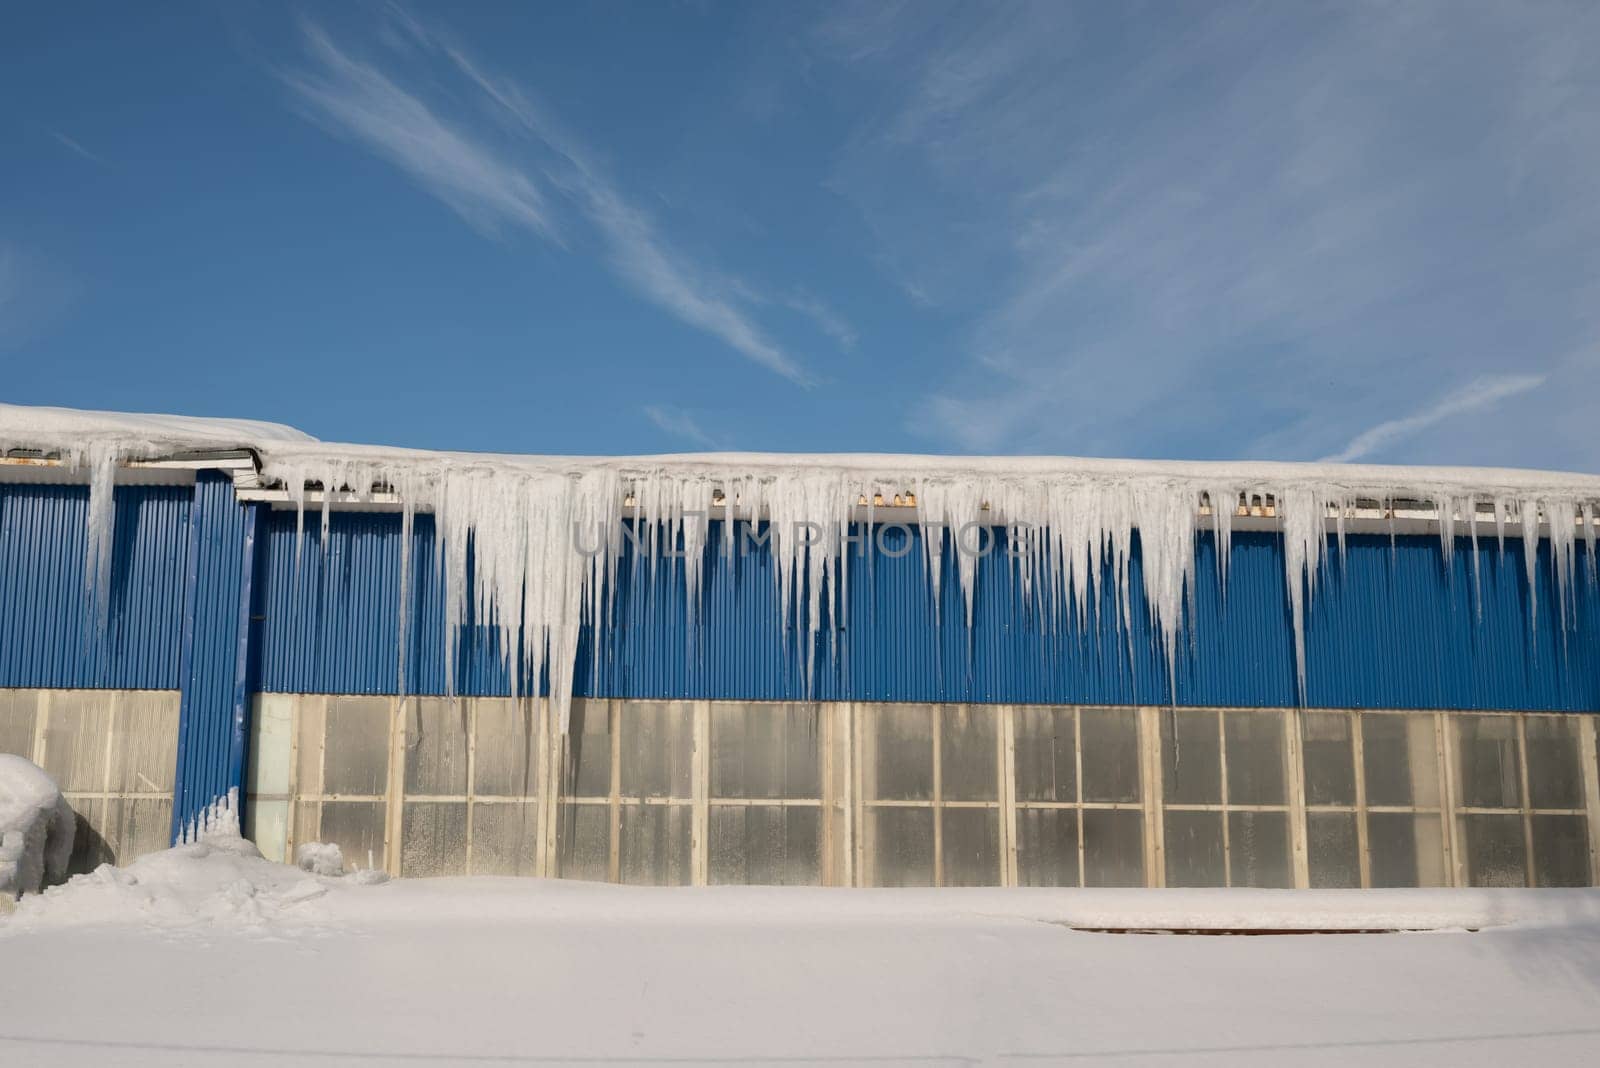 Big icicles on the roof of a townhouse on a snowy winter day among thaw. Cleaning the roofing from snow and icicles. by zartarn